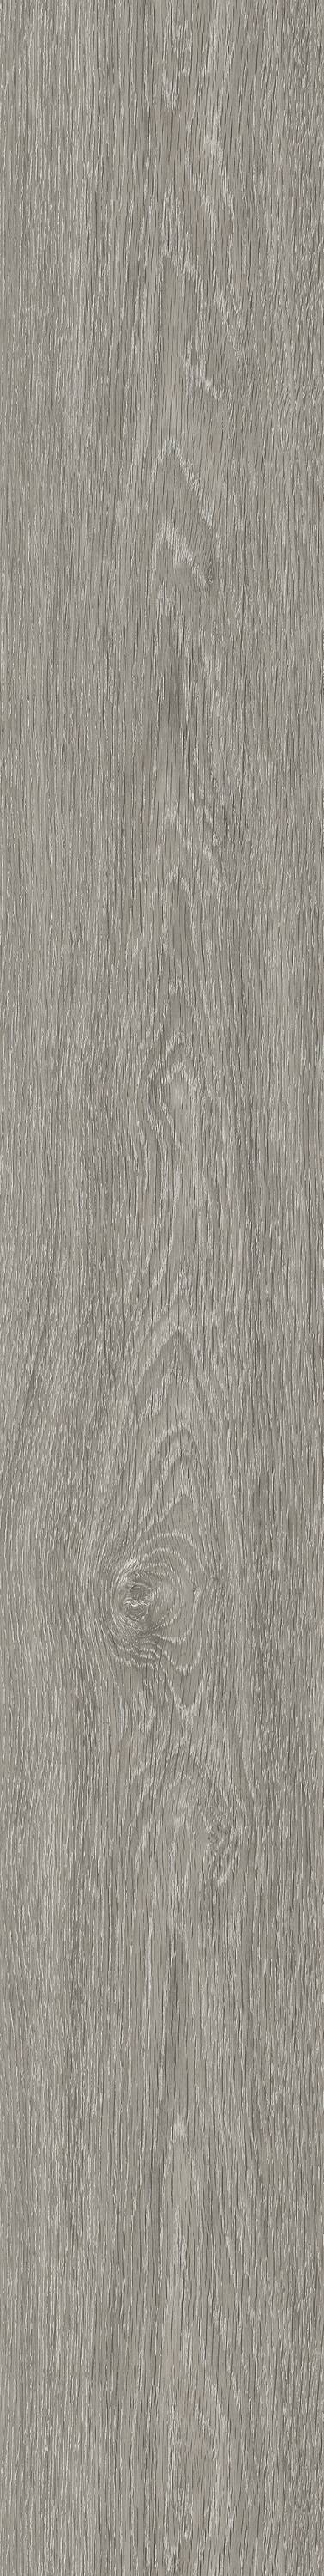 Paragon Rapport 2.5mm Wood Plank Grey French Elm 184.2 X 1219.2 mm